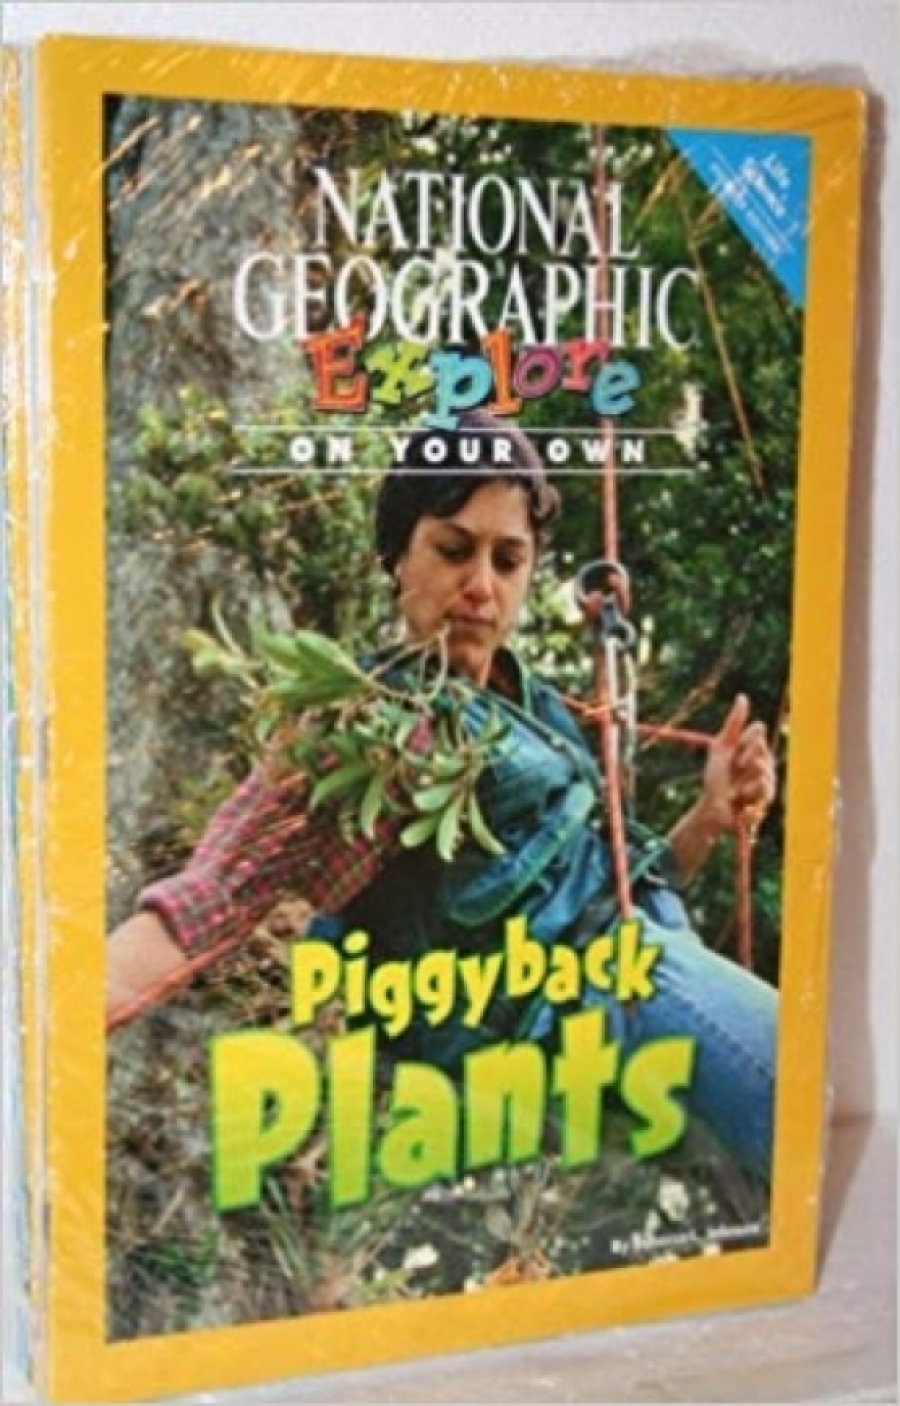 National Geographic Science 3. Explore On Your Own. Pioneer: Piggyback Plants 